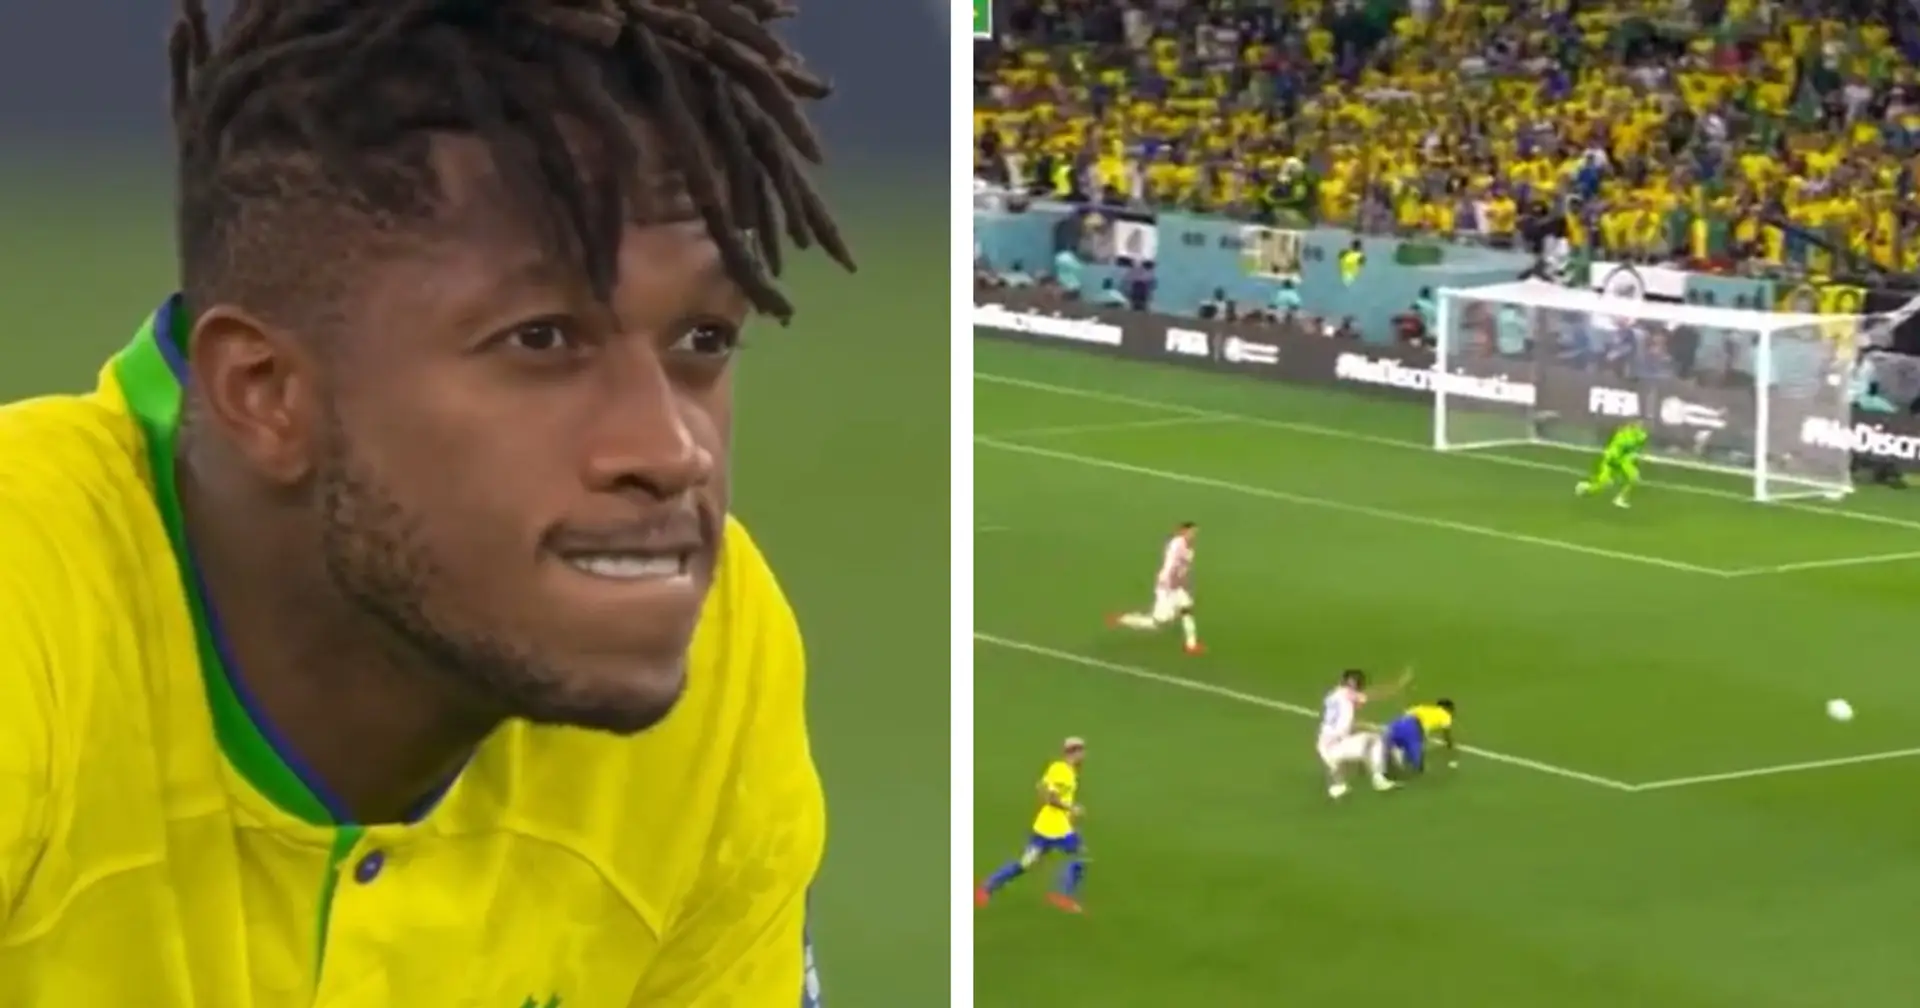 Some fans blame Brazil elimination on Fred alone - here's what happened